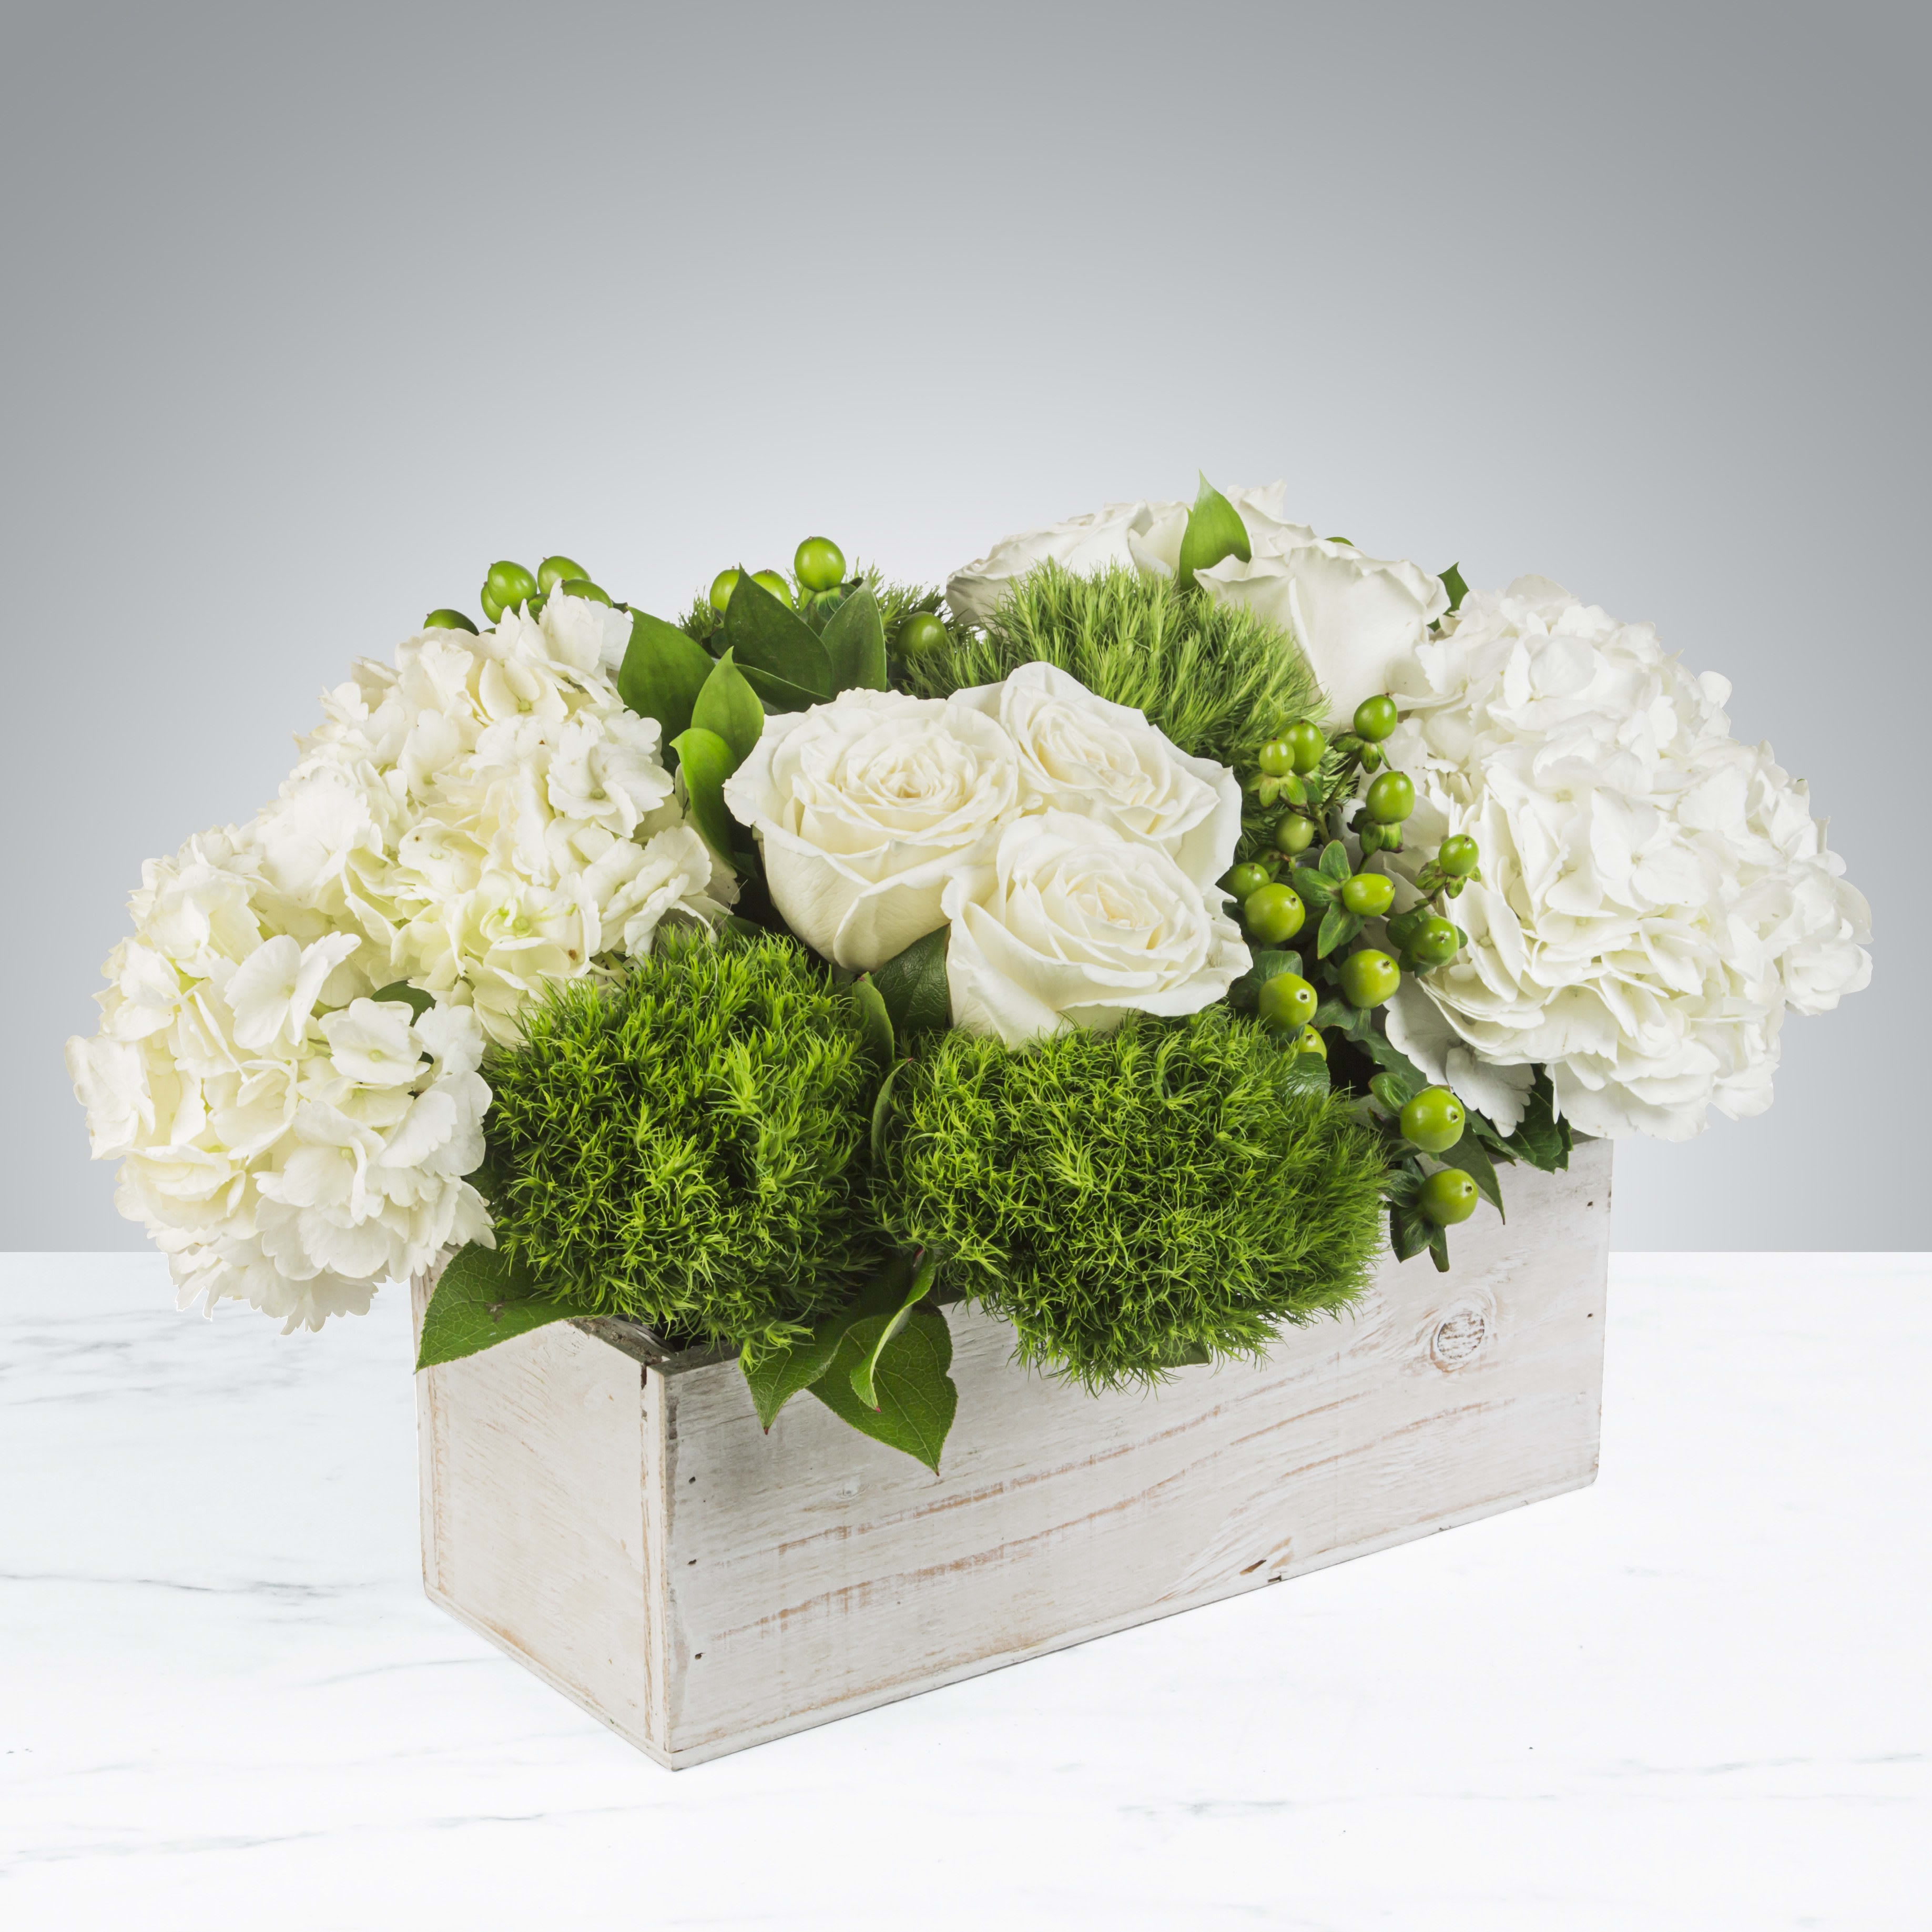 Merry Grinchmas - This crisp white and green arrangement includes roses, dianthus, and hydrangeas. It's size and shape also make it a fitting centerpiece for any table.   